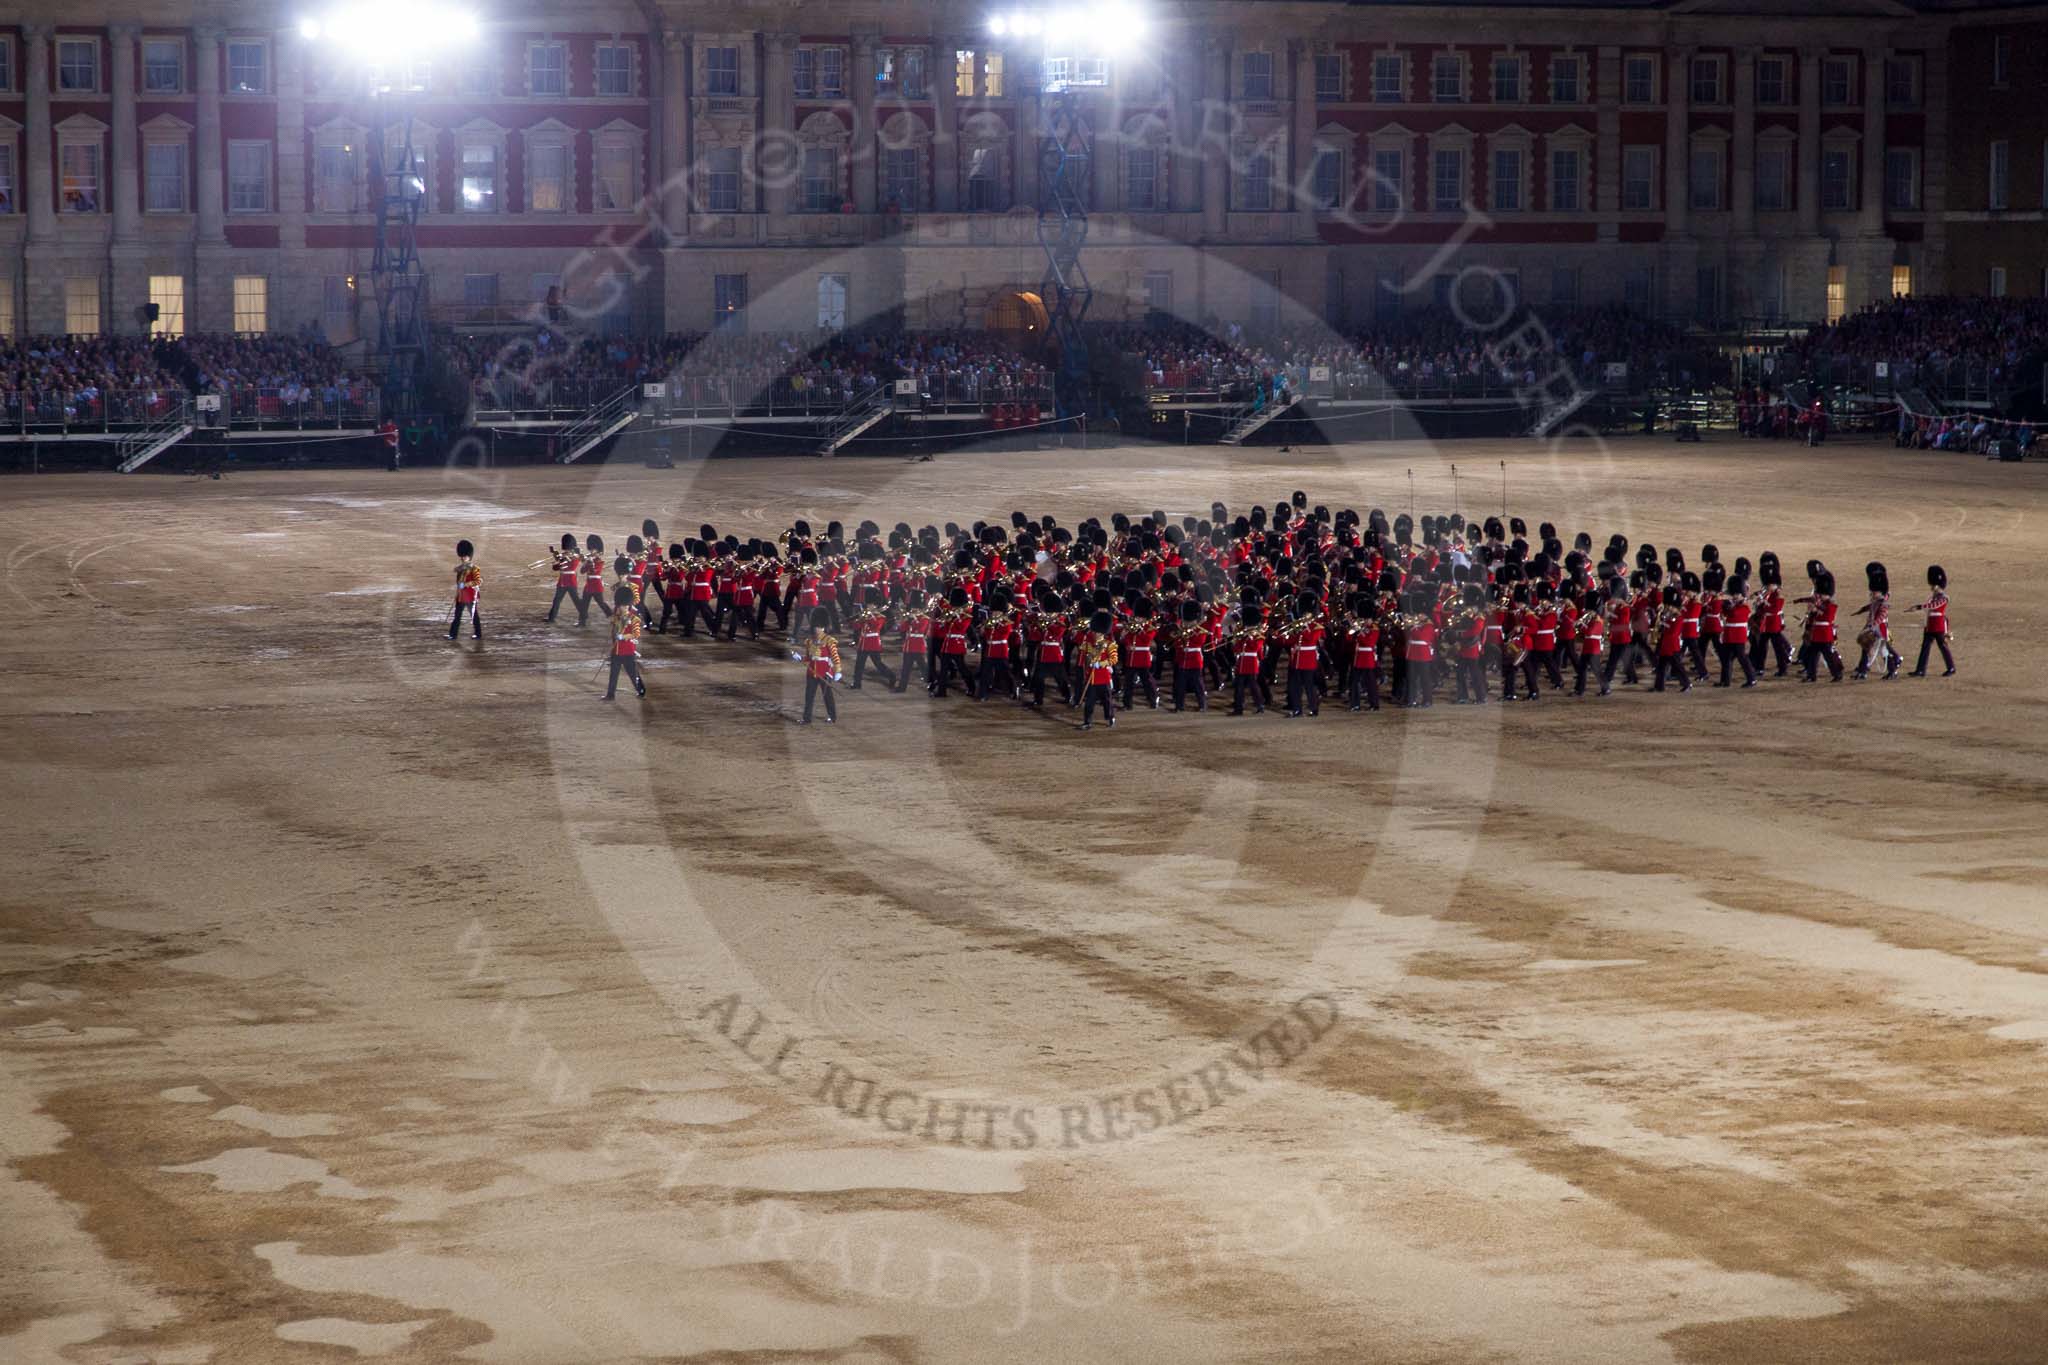 Beating Retreat 2014.
Horse Guards Parade, Westminster,
London SW1A,

United Kingdom,
on 11 June 2014 at 21:59, image #436